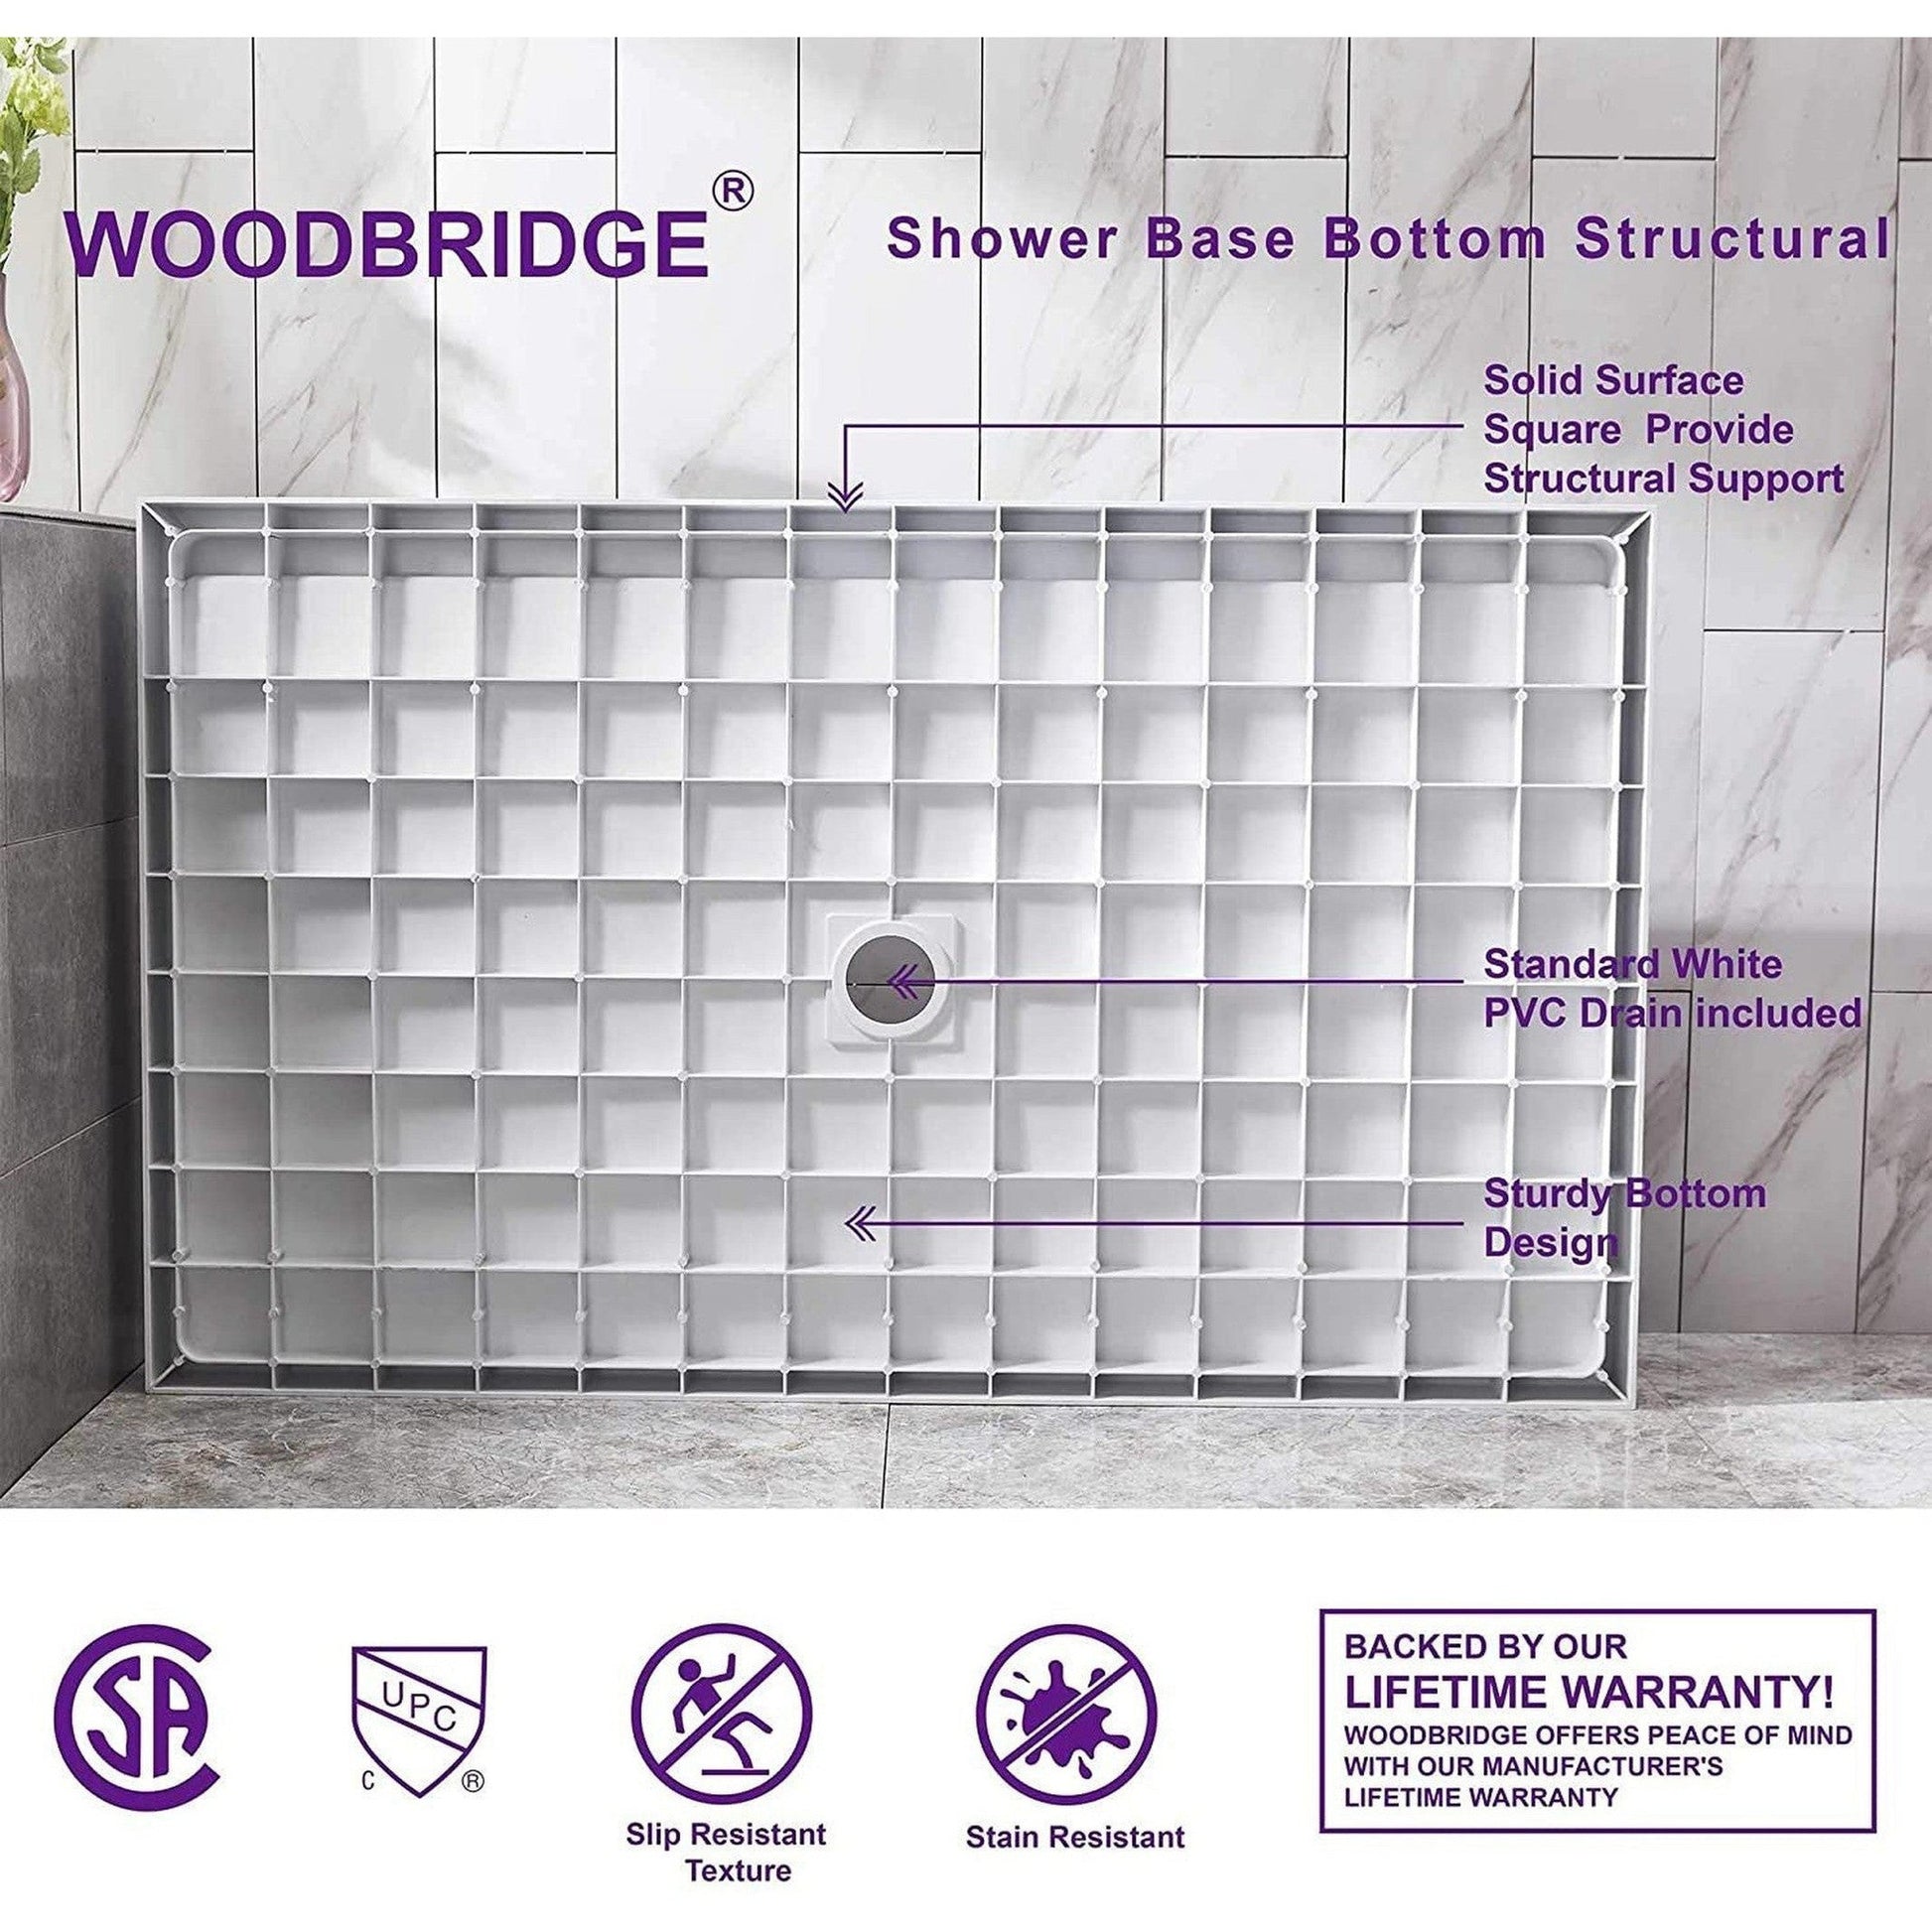 WoodBridge 60" x 30" White Solid Surface Shower Base Center Drain Location With Brushed Nickel Trench Drain Cover